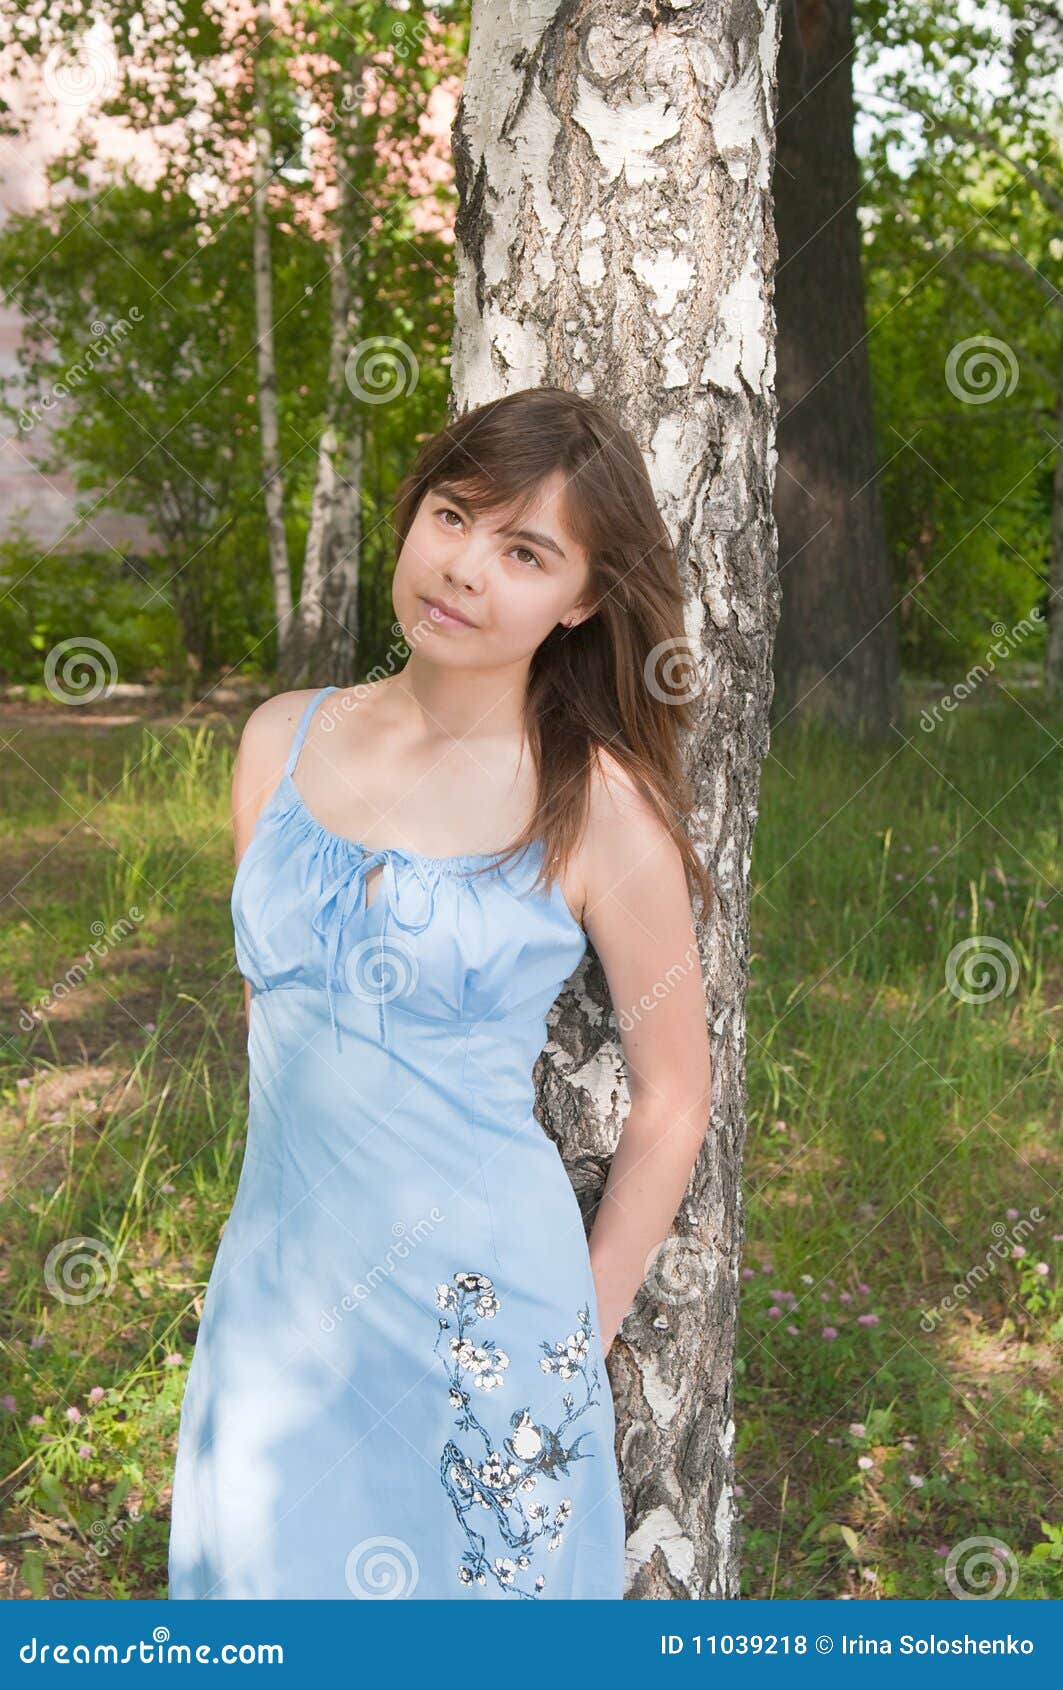 The Romantic Girl Stands Near To a Birch Stock Photo - Image of face ...